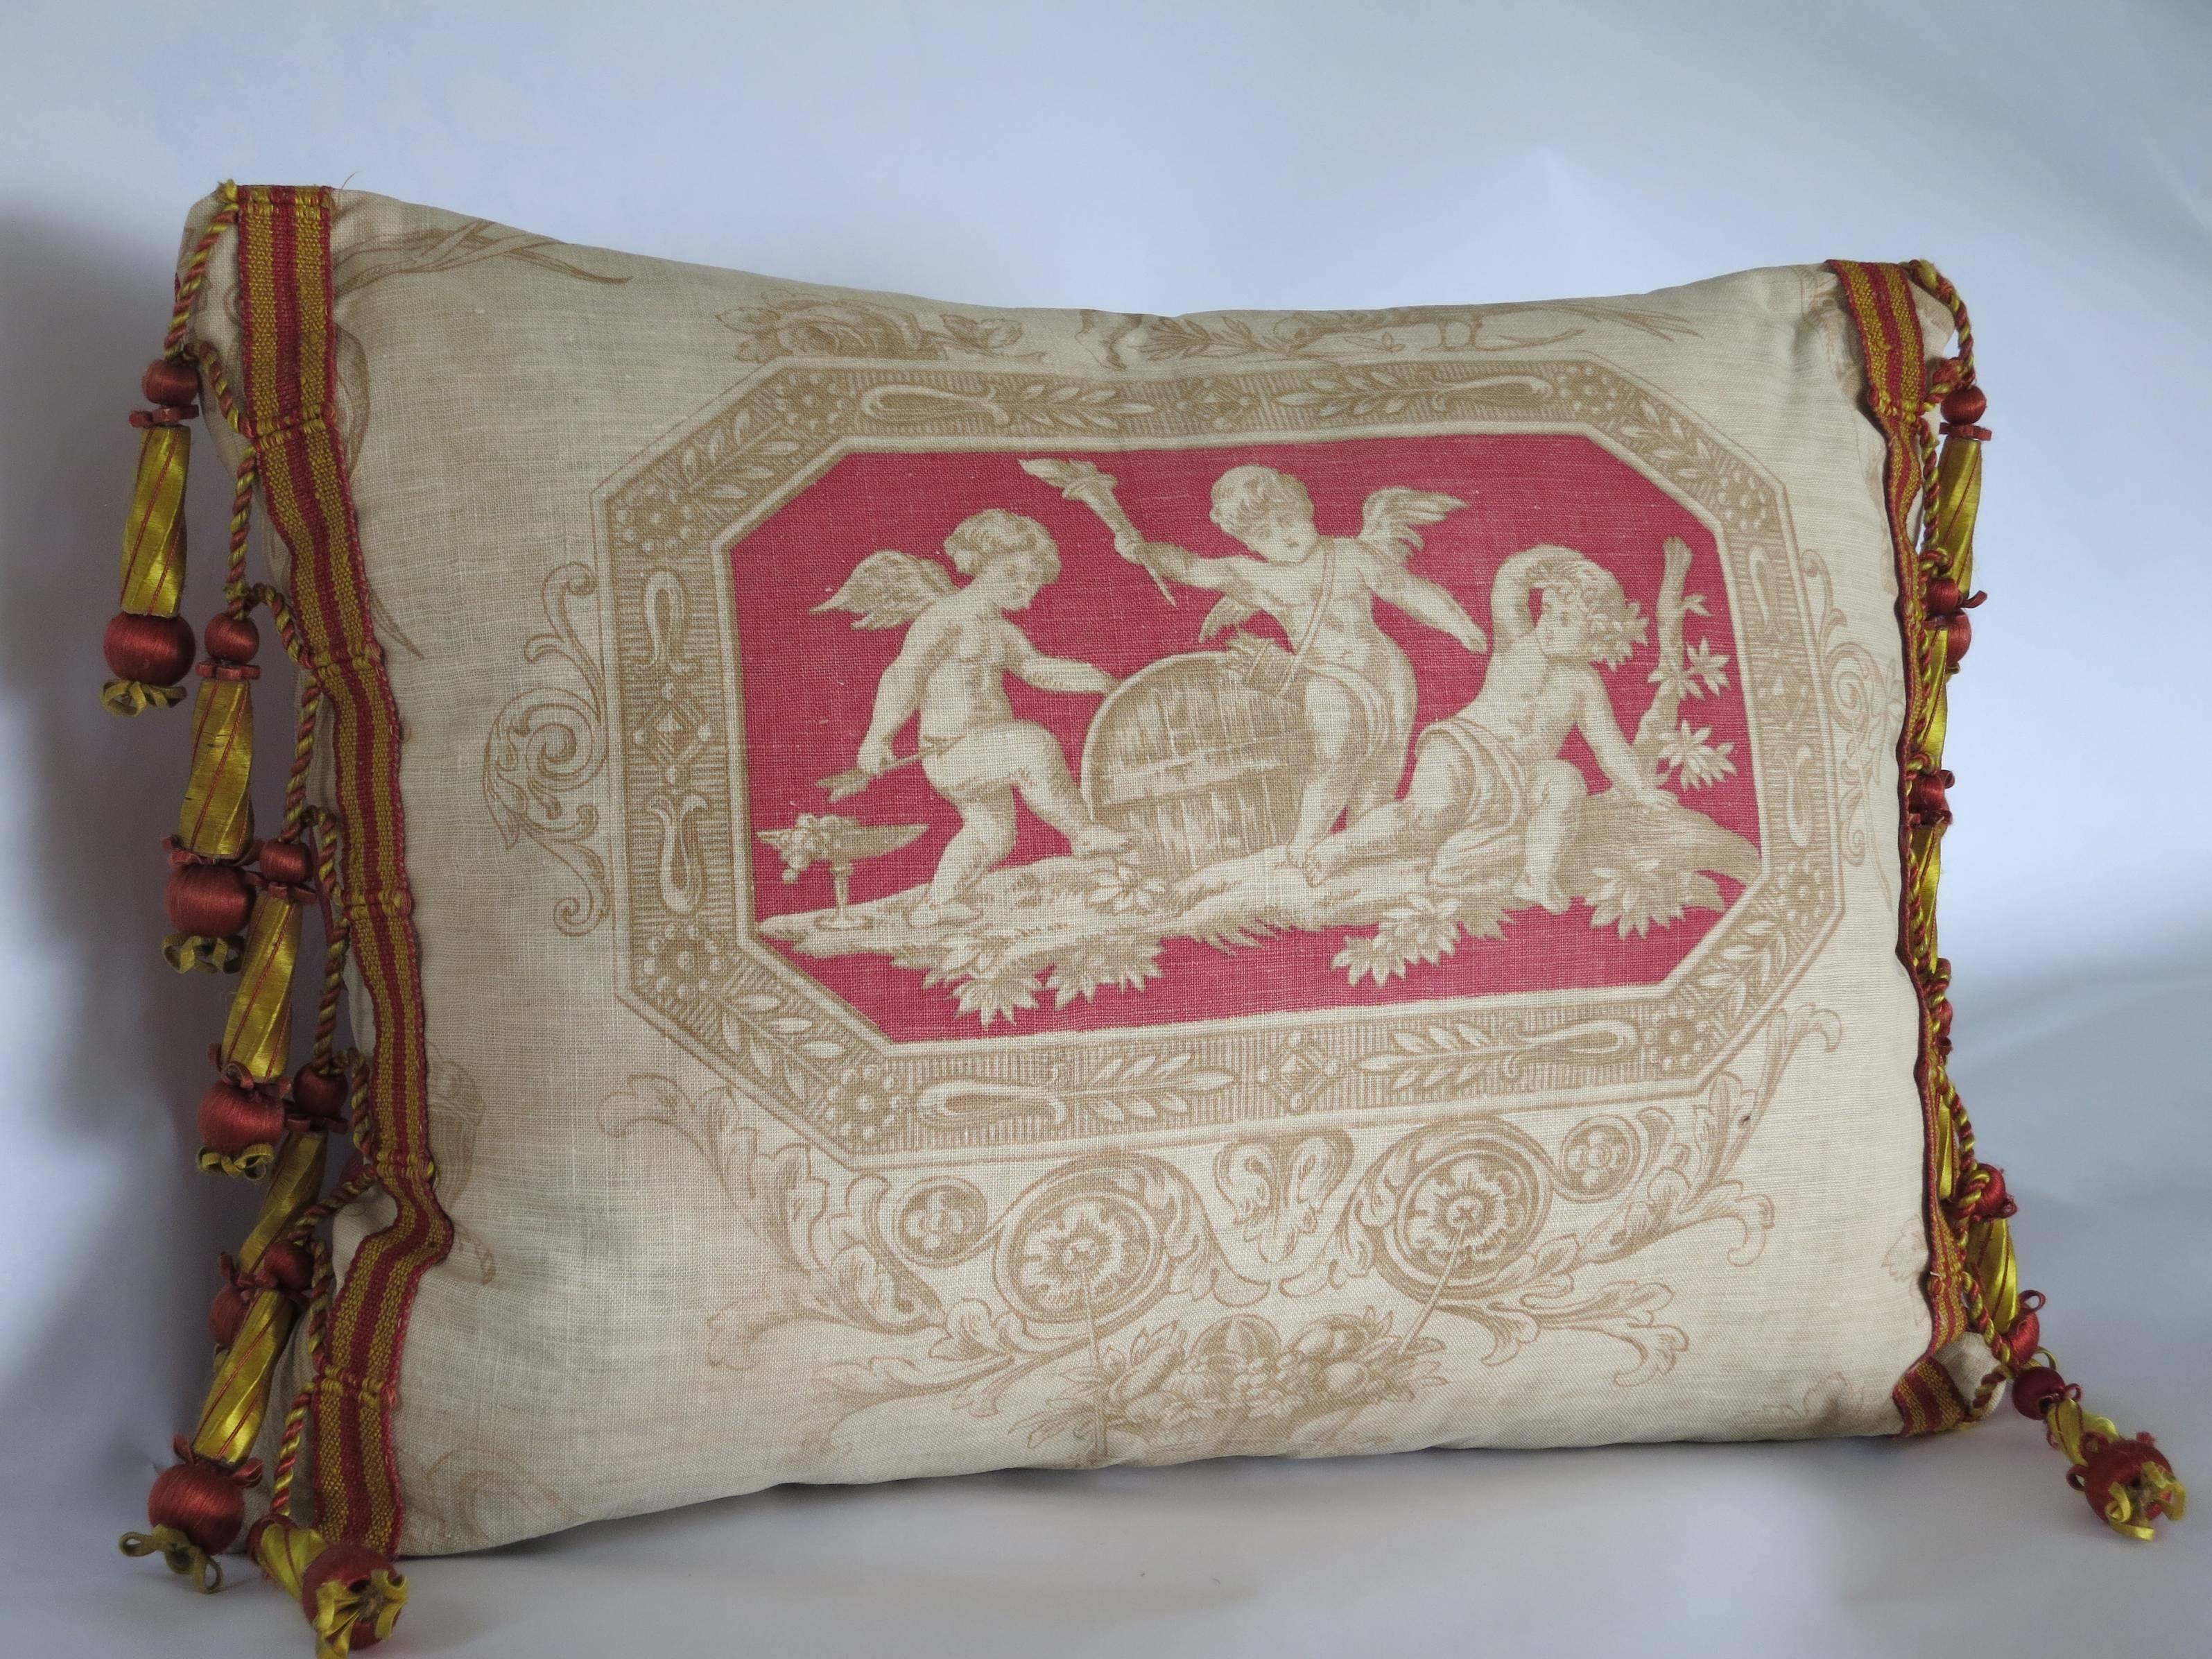 Hand-Crafted 19th Century French Toile and Silk Textile Pillow with Tassels				 			